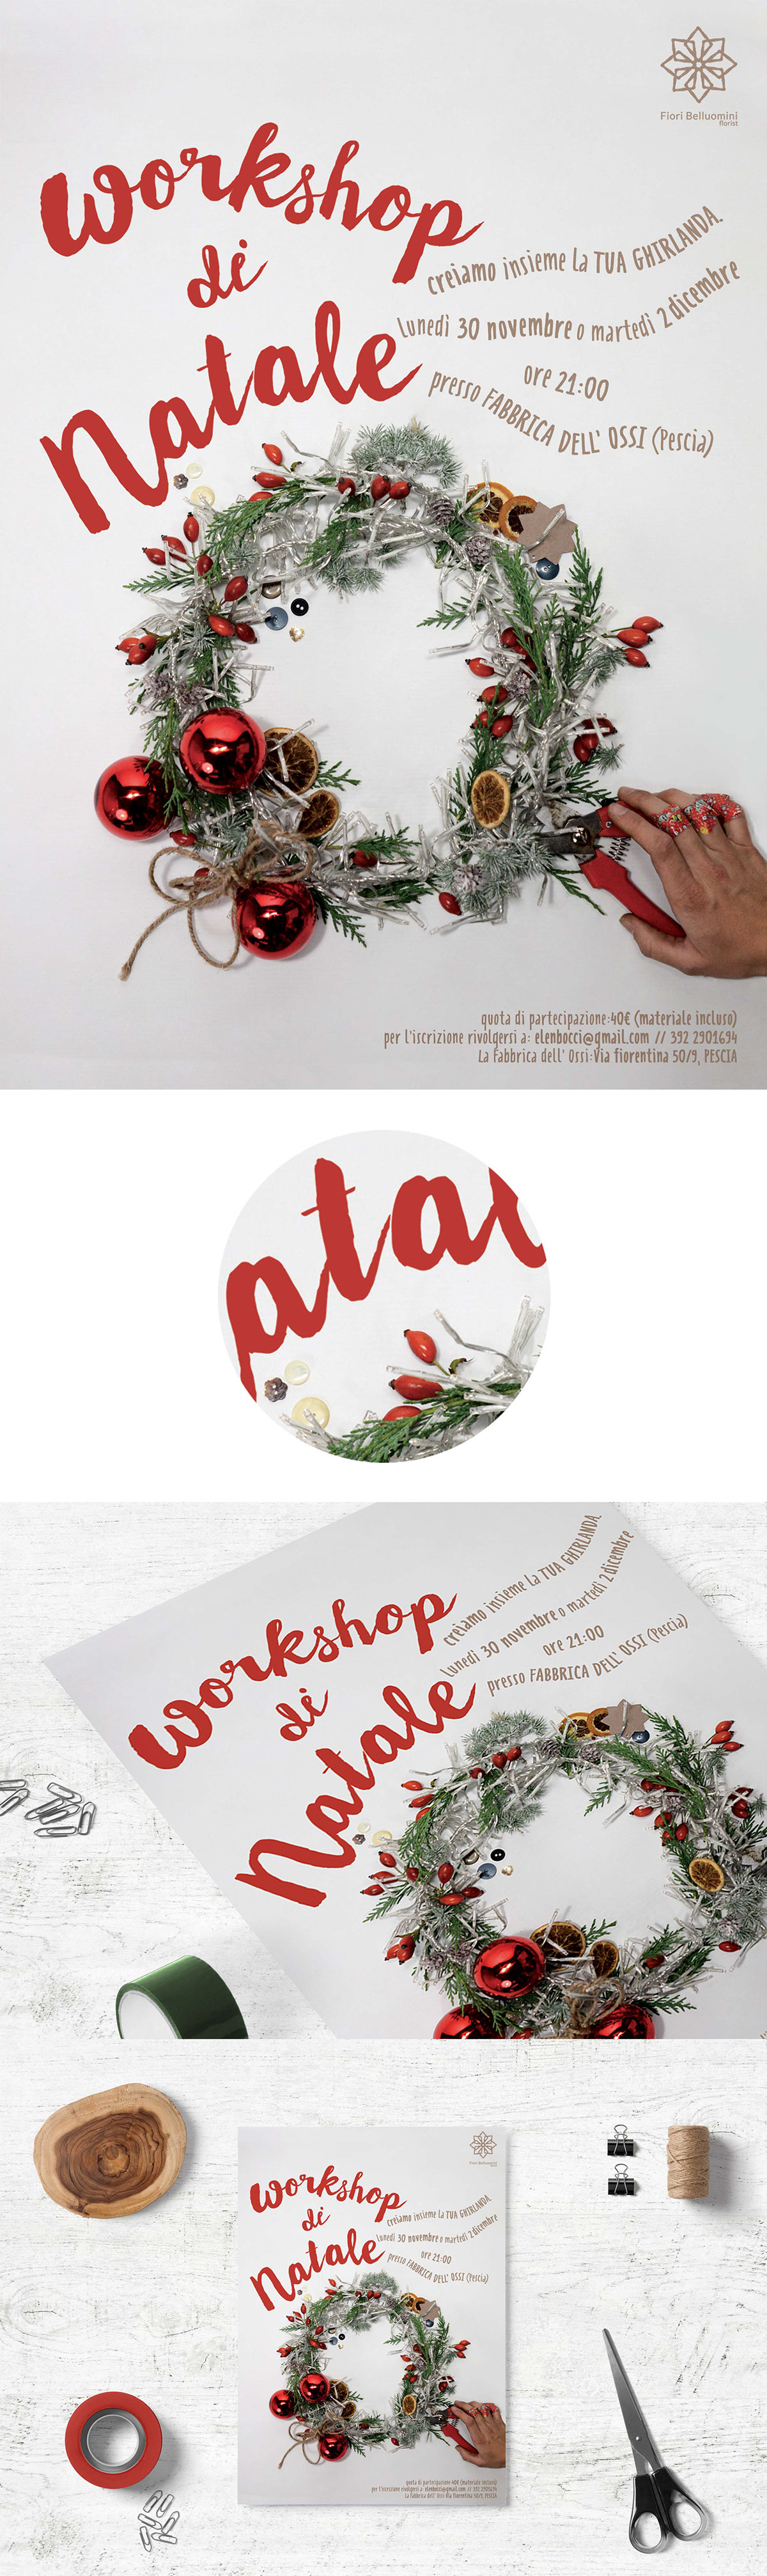 print poster paper graphic graphicdesign Christmas garland Mockup wood song choir songs microphone background shooting